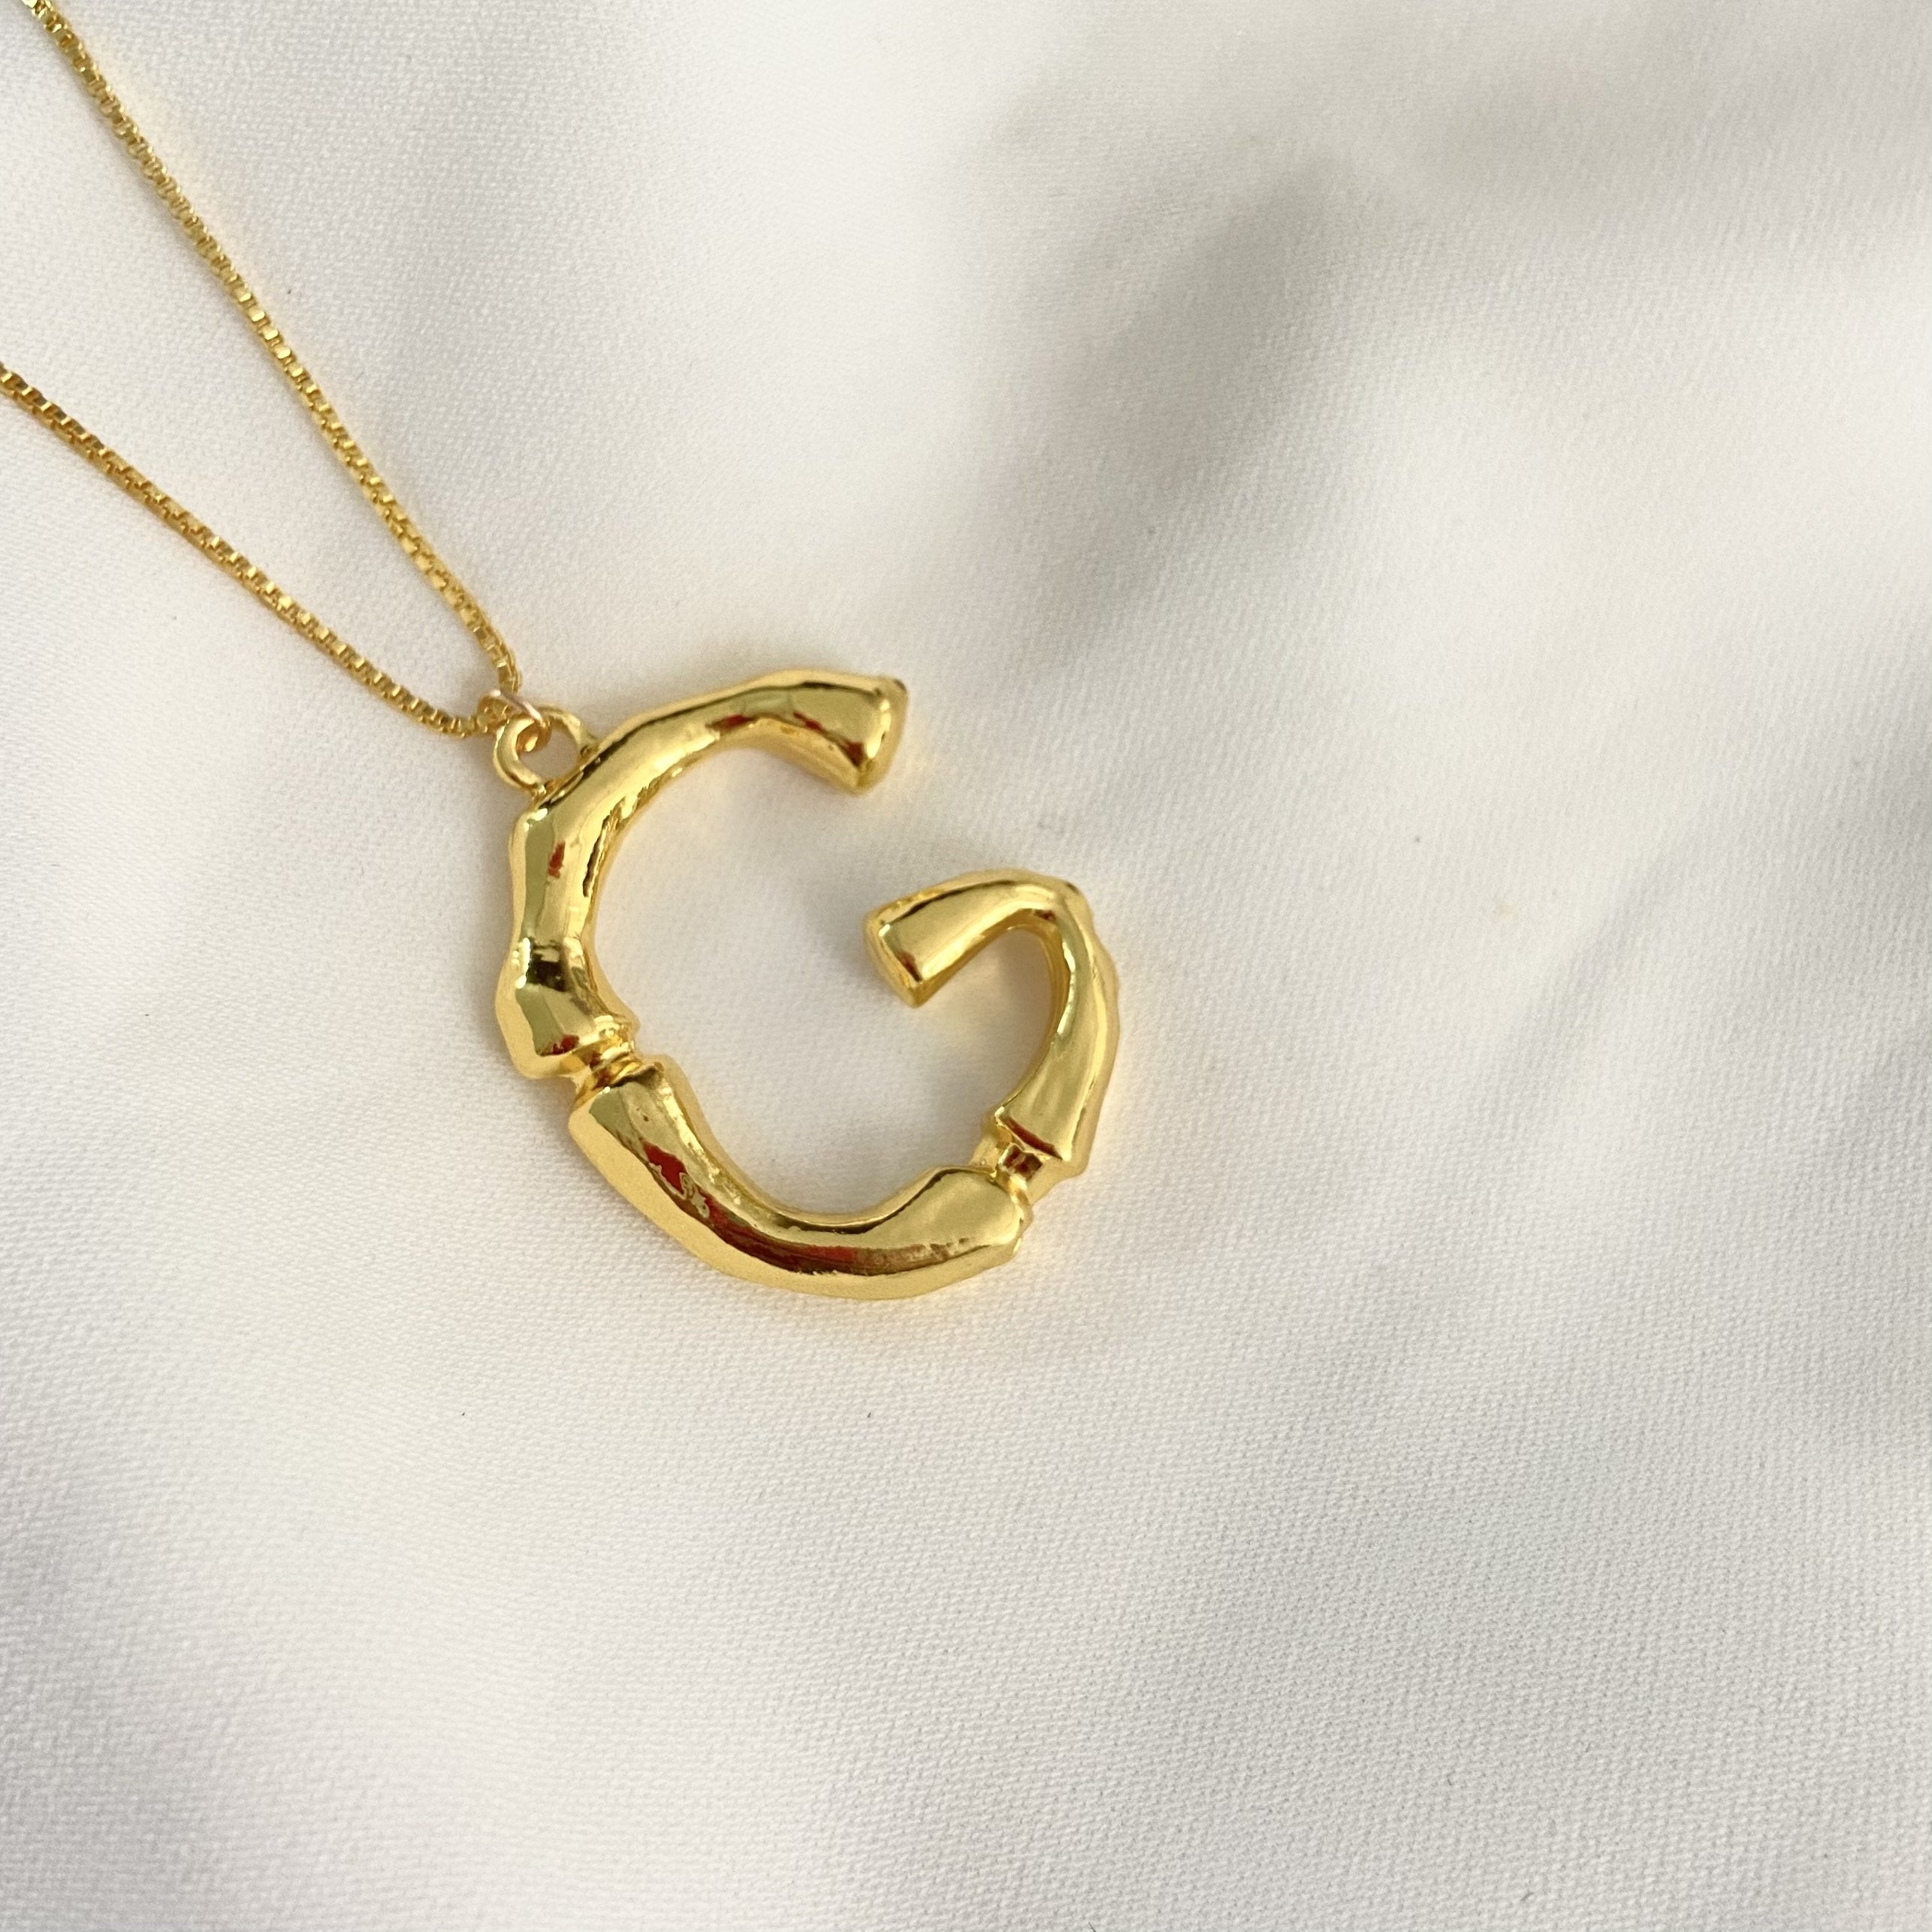 Initial Necklaces - Upakarna Initial Necklaces G A D golden 15